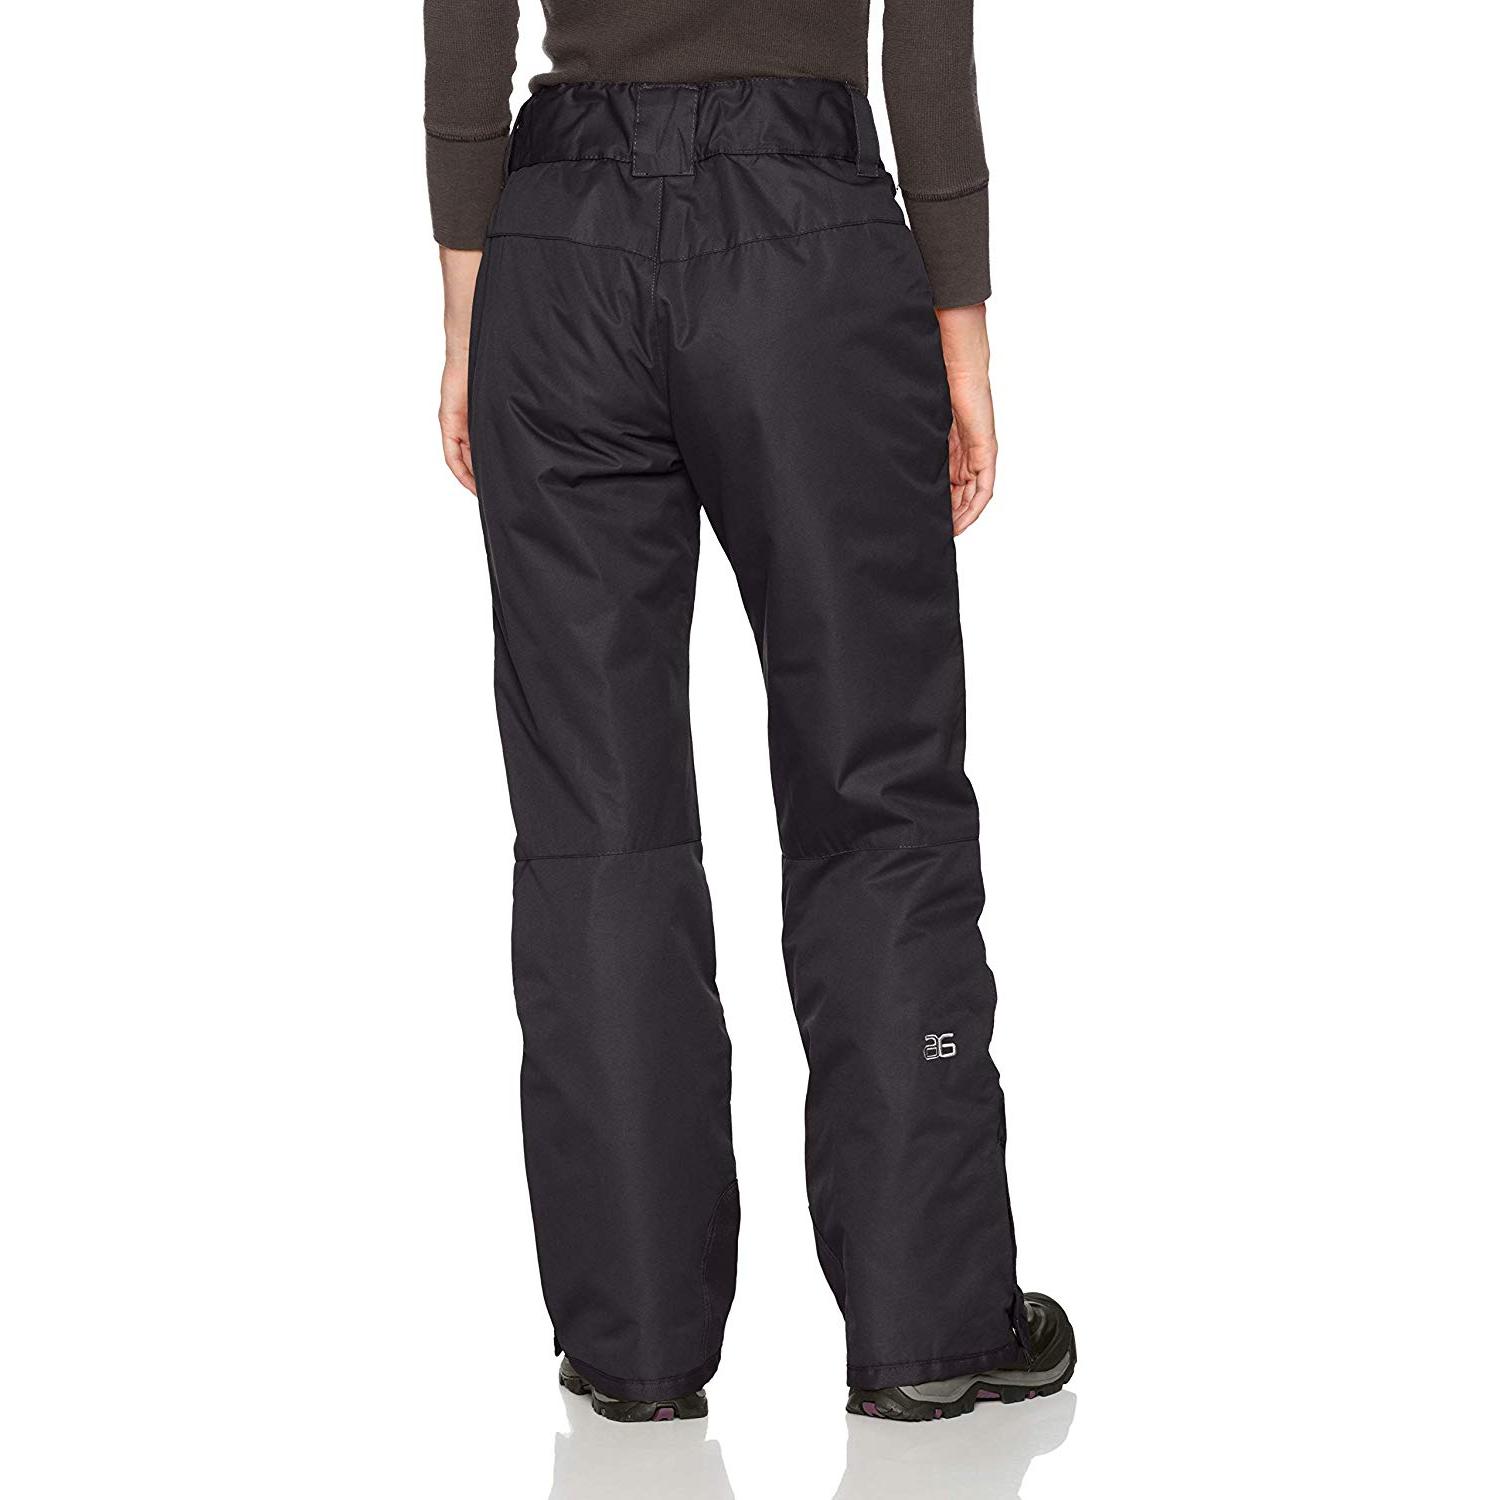 NEW Arctix Women's Snow Sports Insulated Pants, White XS X-Small